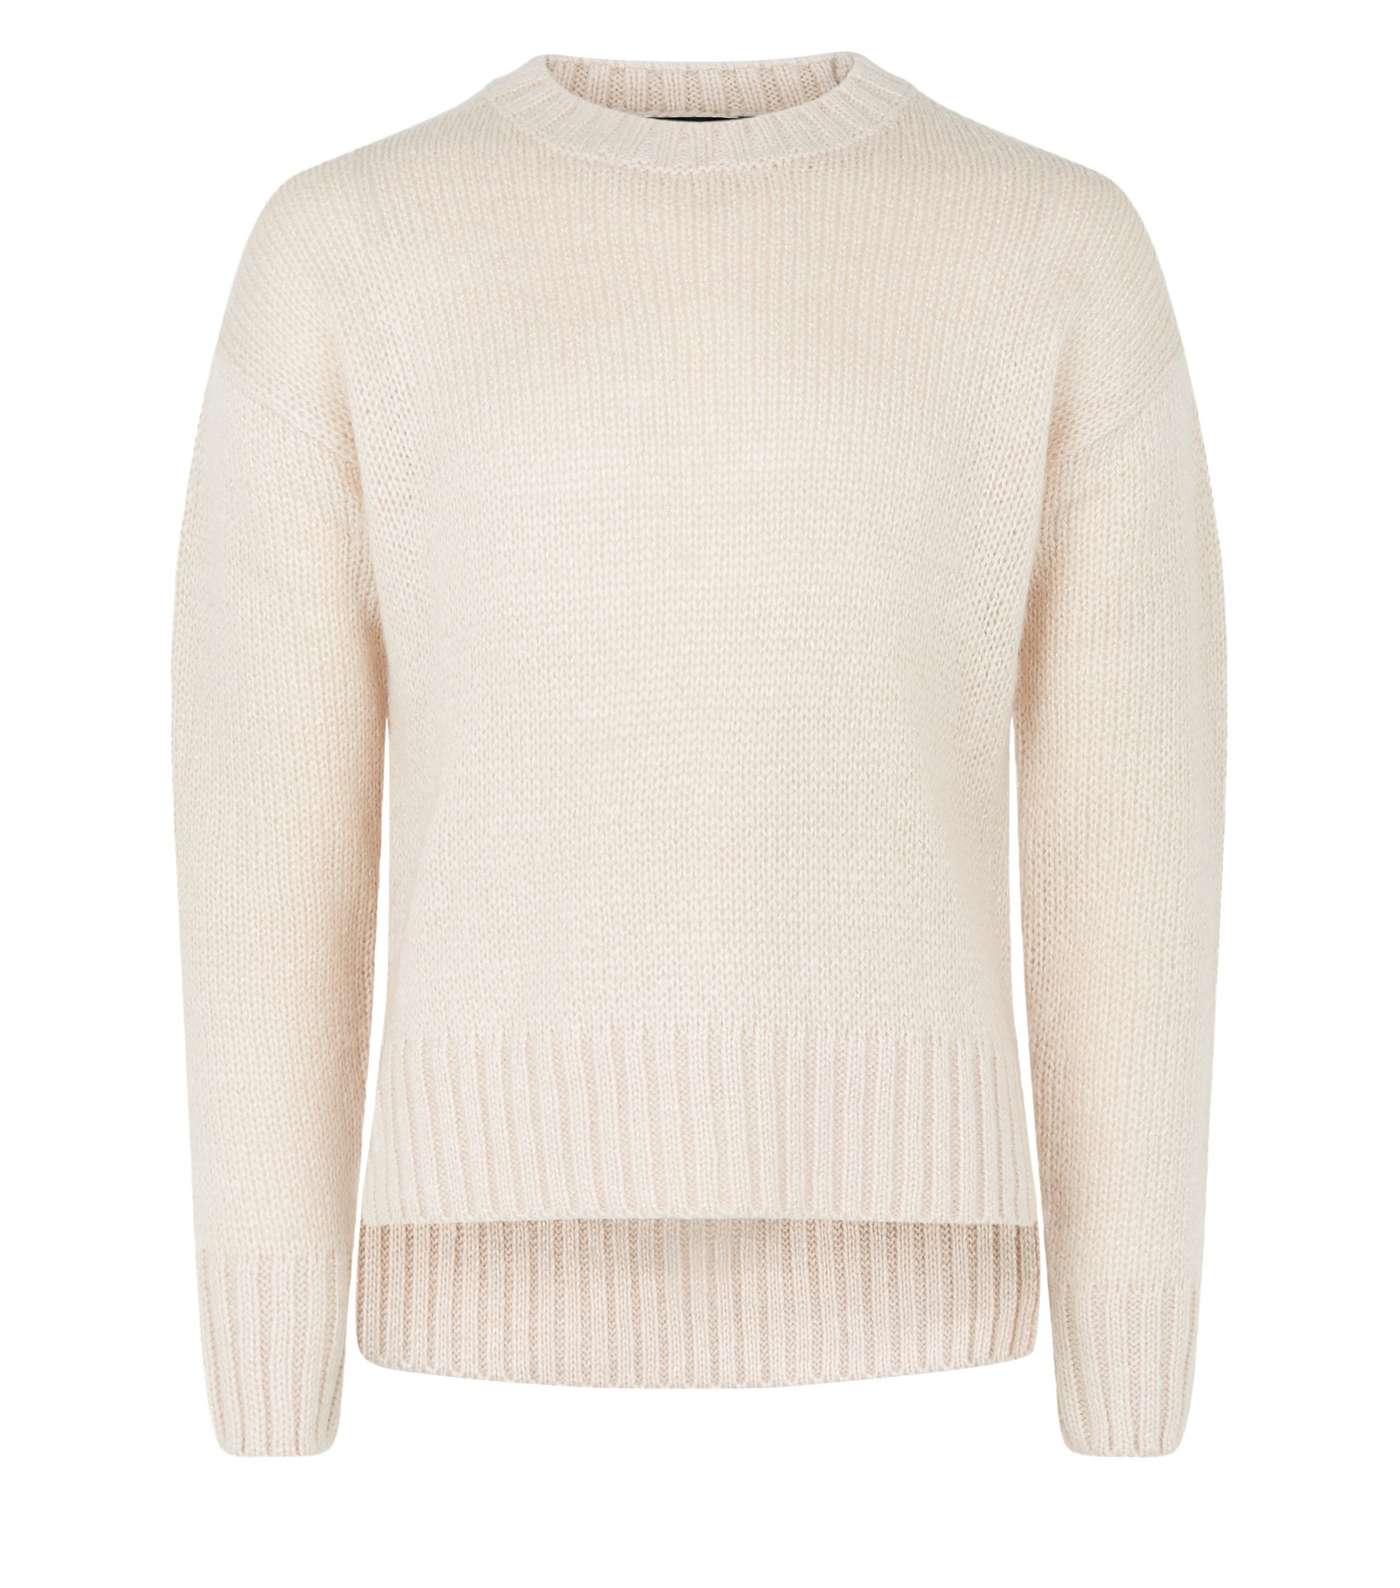 Girls Pale Pink Knitted Jumper  Image 4